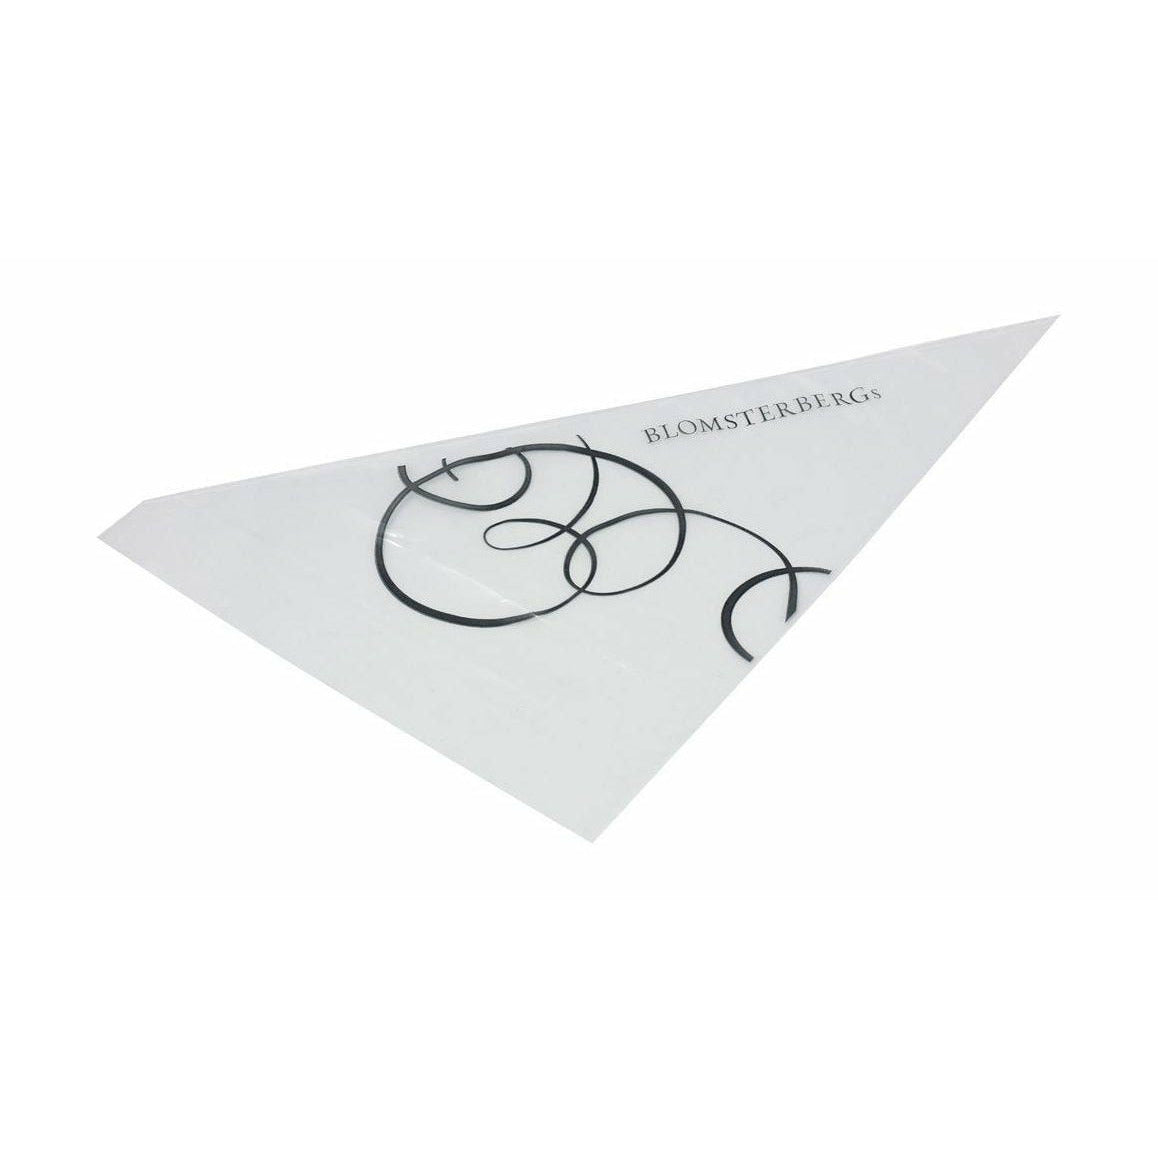 Blomsterbergs Disposable Piping Bag For Creams, 50 Pcs.